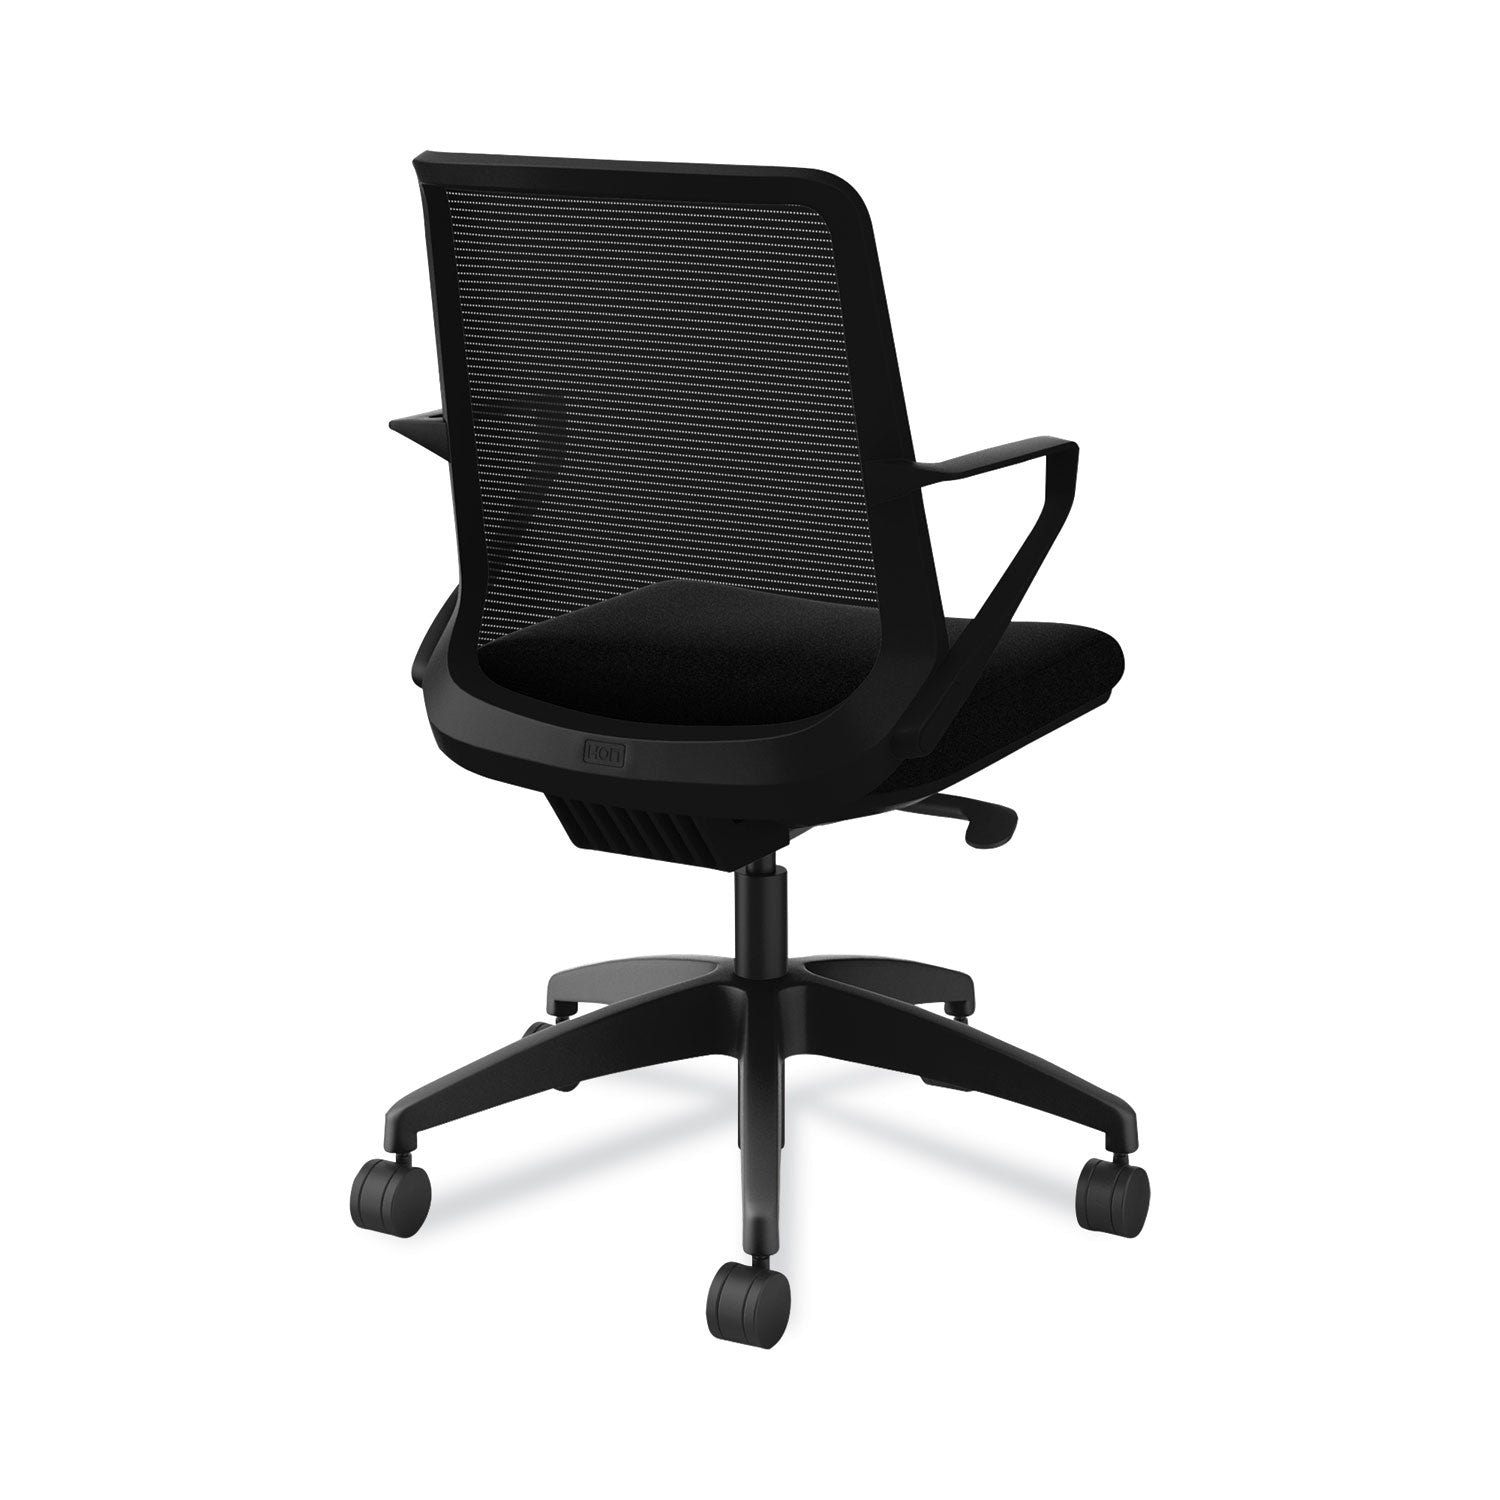 cliq-office-chair-supports-up-to-300-lb-17-to-22-seat-height-black-seat-back-black-base-ships-in-7-10-business-days_honclqimcu10t - 1